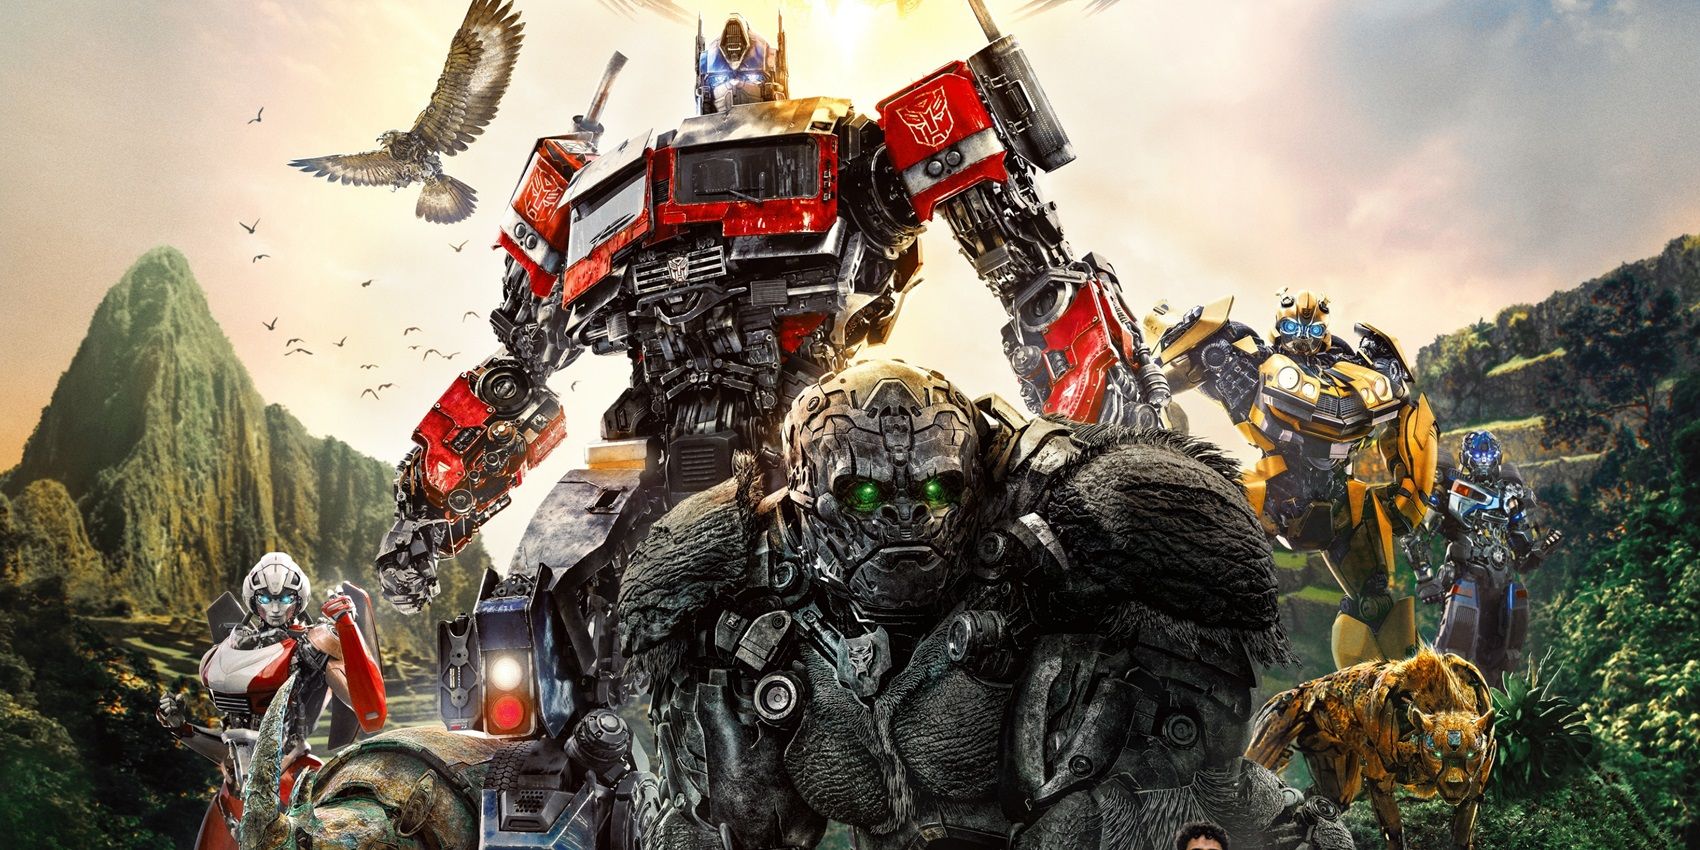 The poster for Transformers Rise of the Beasts